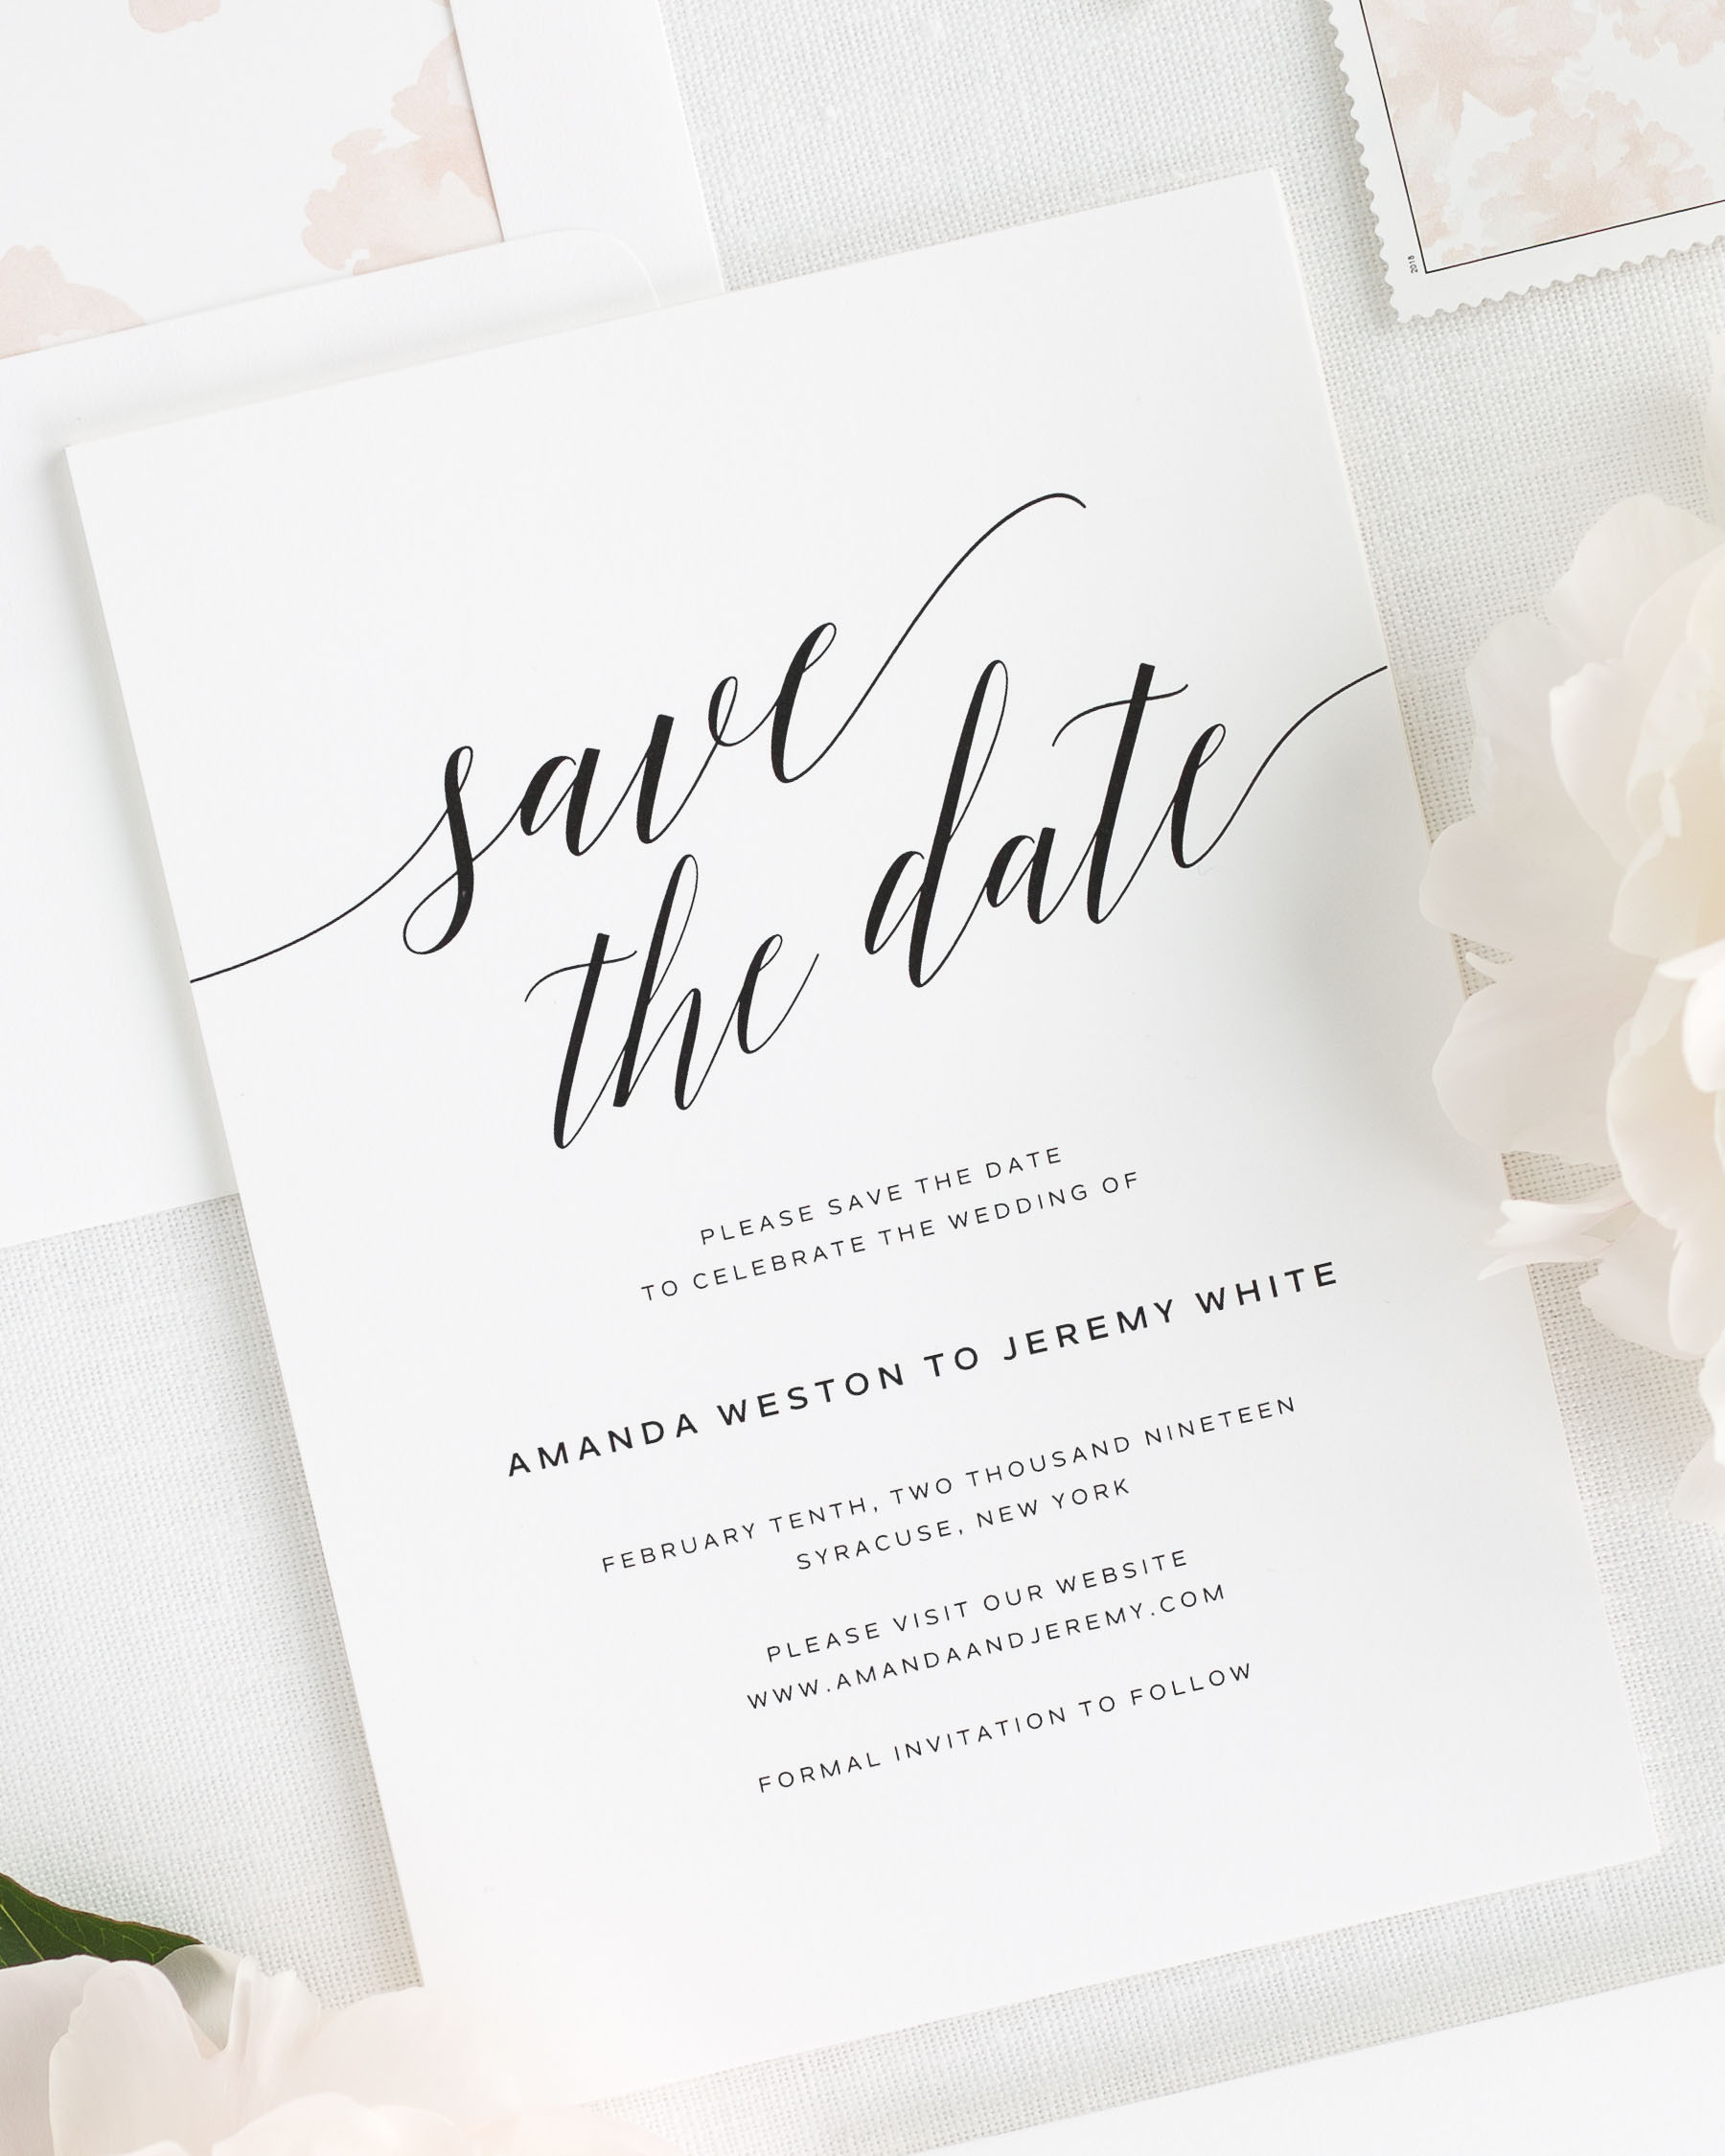 Save The Date And Wedding Invitations
 Daring Romance Save the Date Cards Save the Date Cards